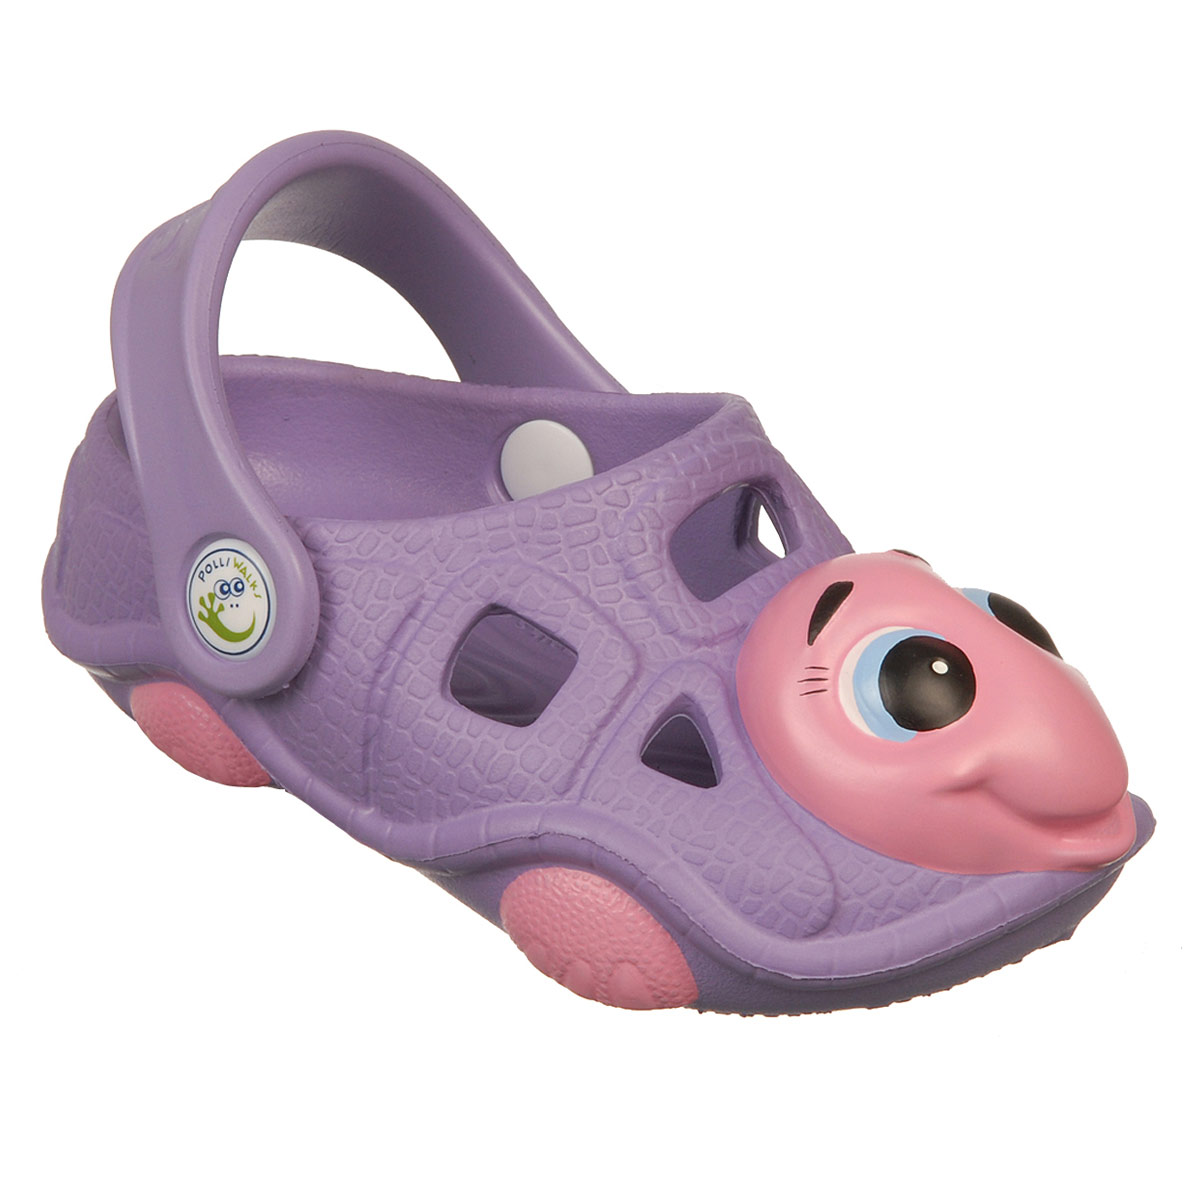 Polliwalks : Toddler shoes Tory  the Turtle  Purple # 7